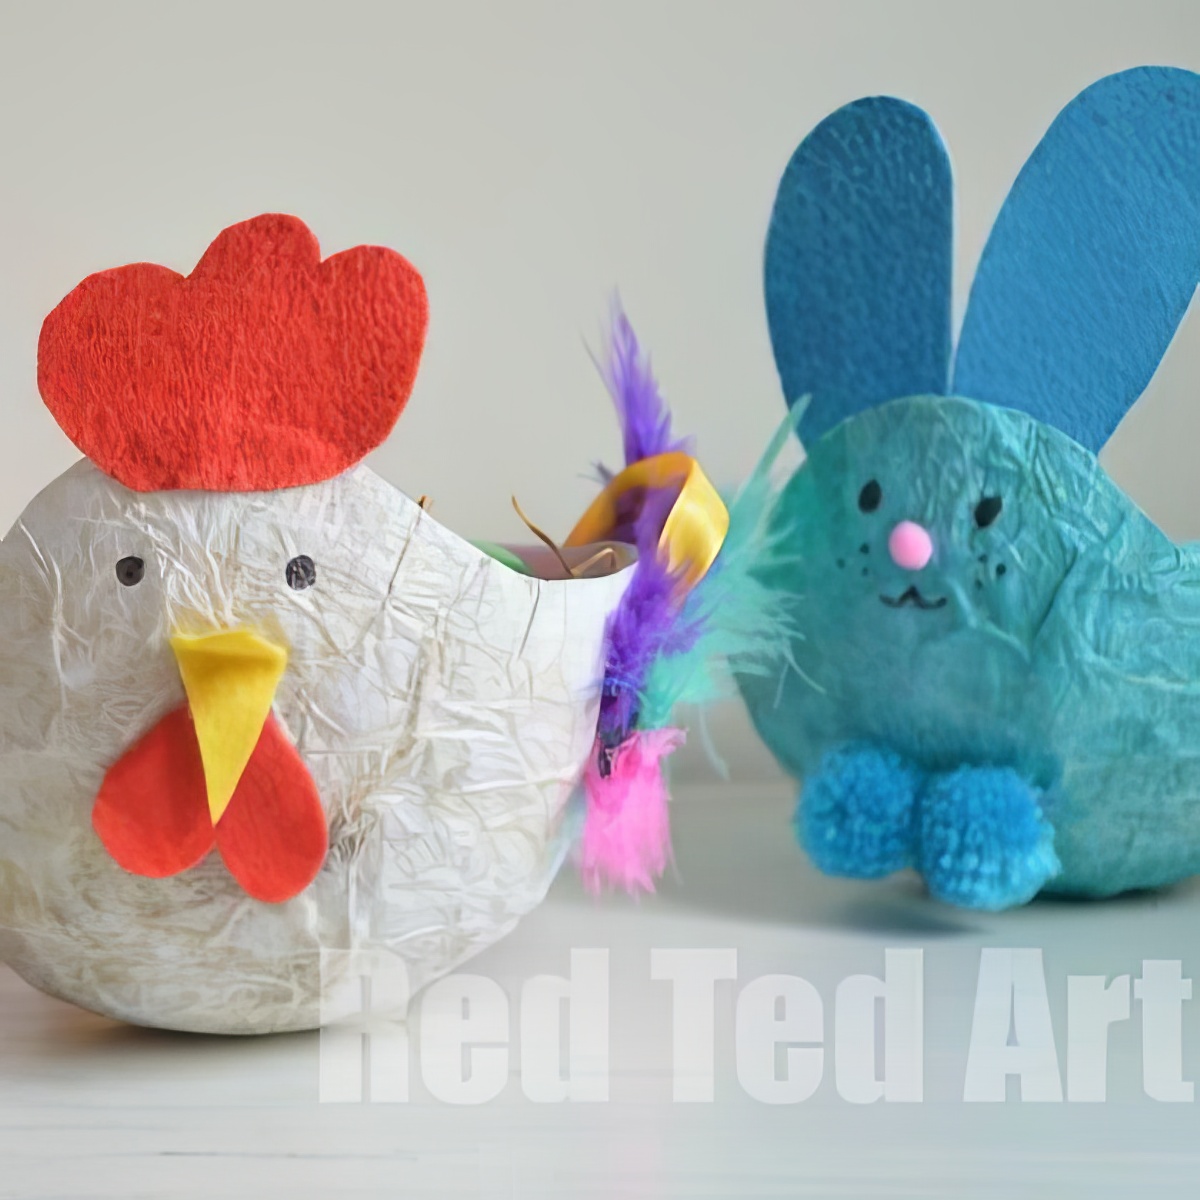 Make this gorgeous paper mache Easter egg basket for the kids Easter egg hunt this year!